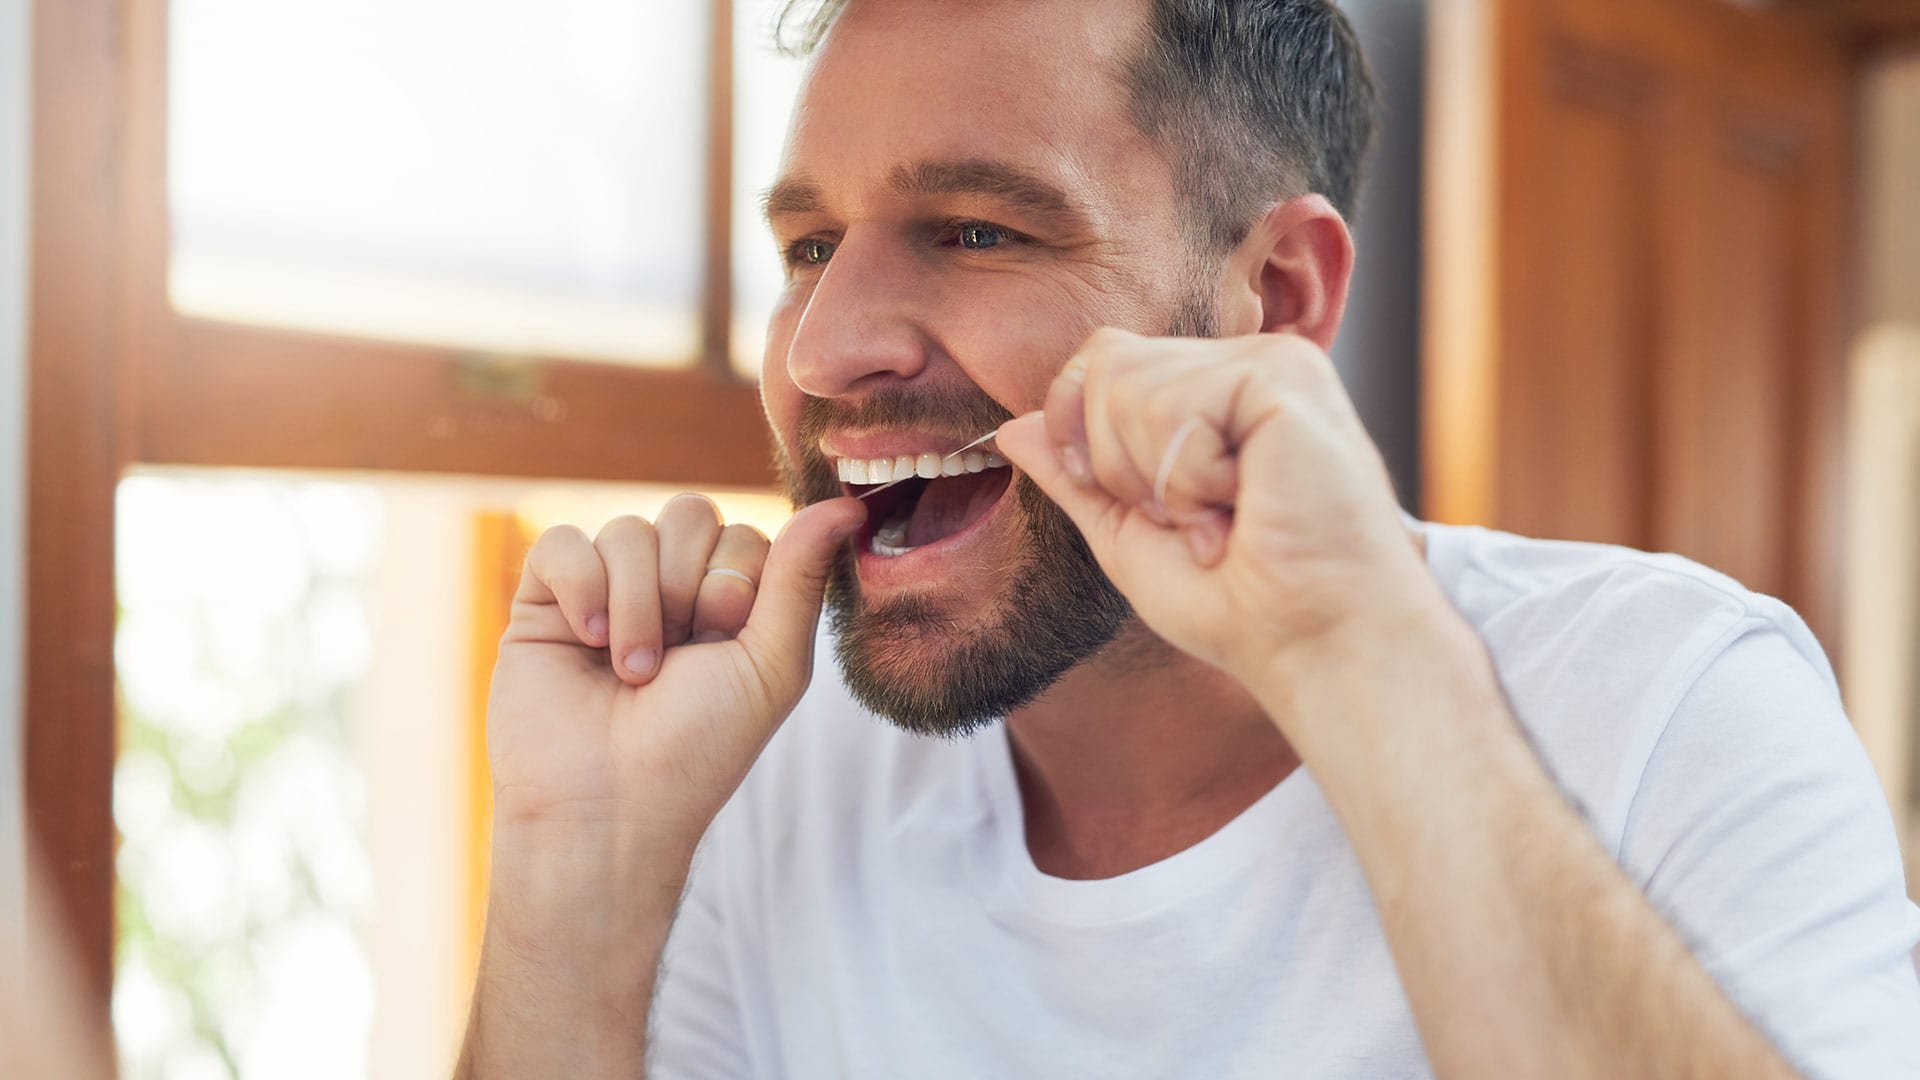 A man with healthy looking teeth and gums practices good dental hygiene by flossing in front of a mirror.